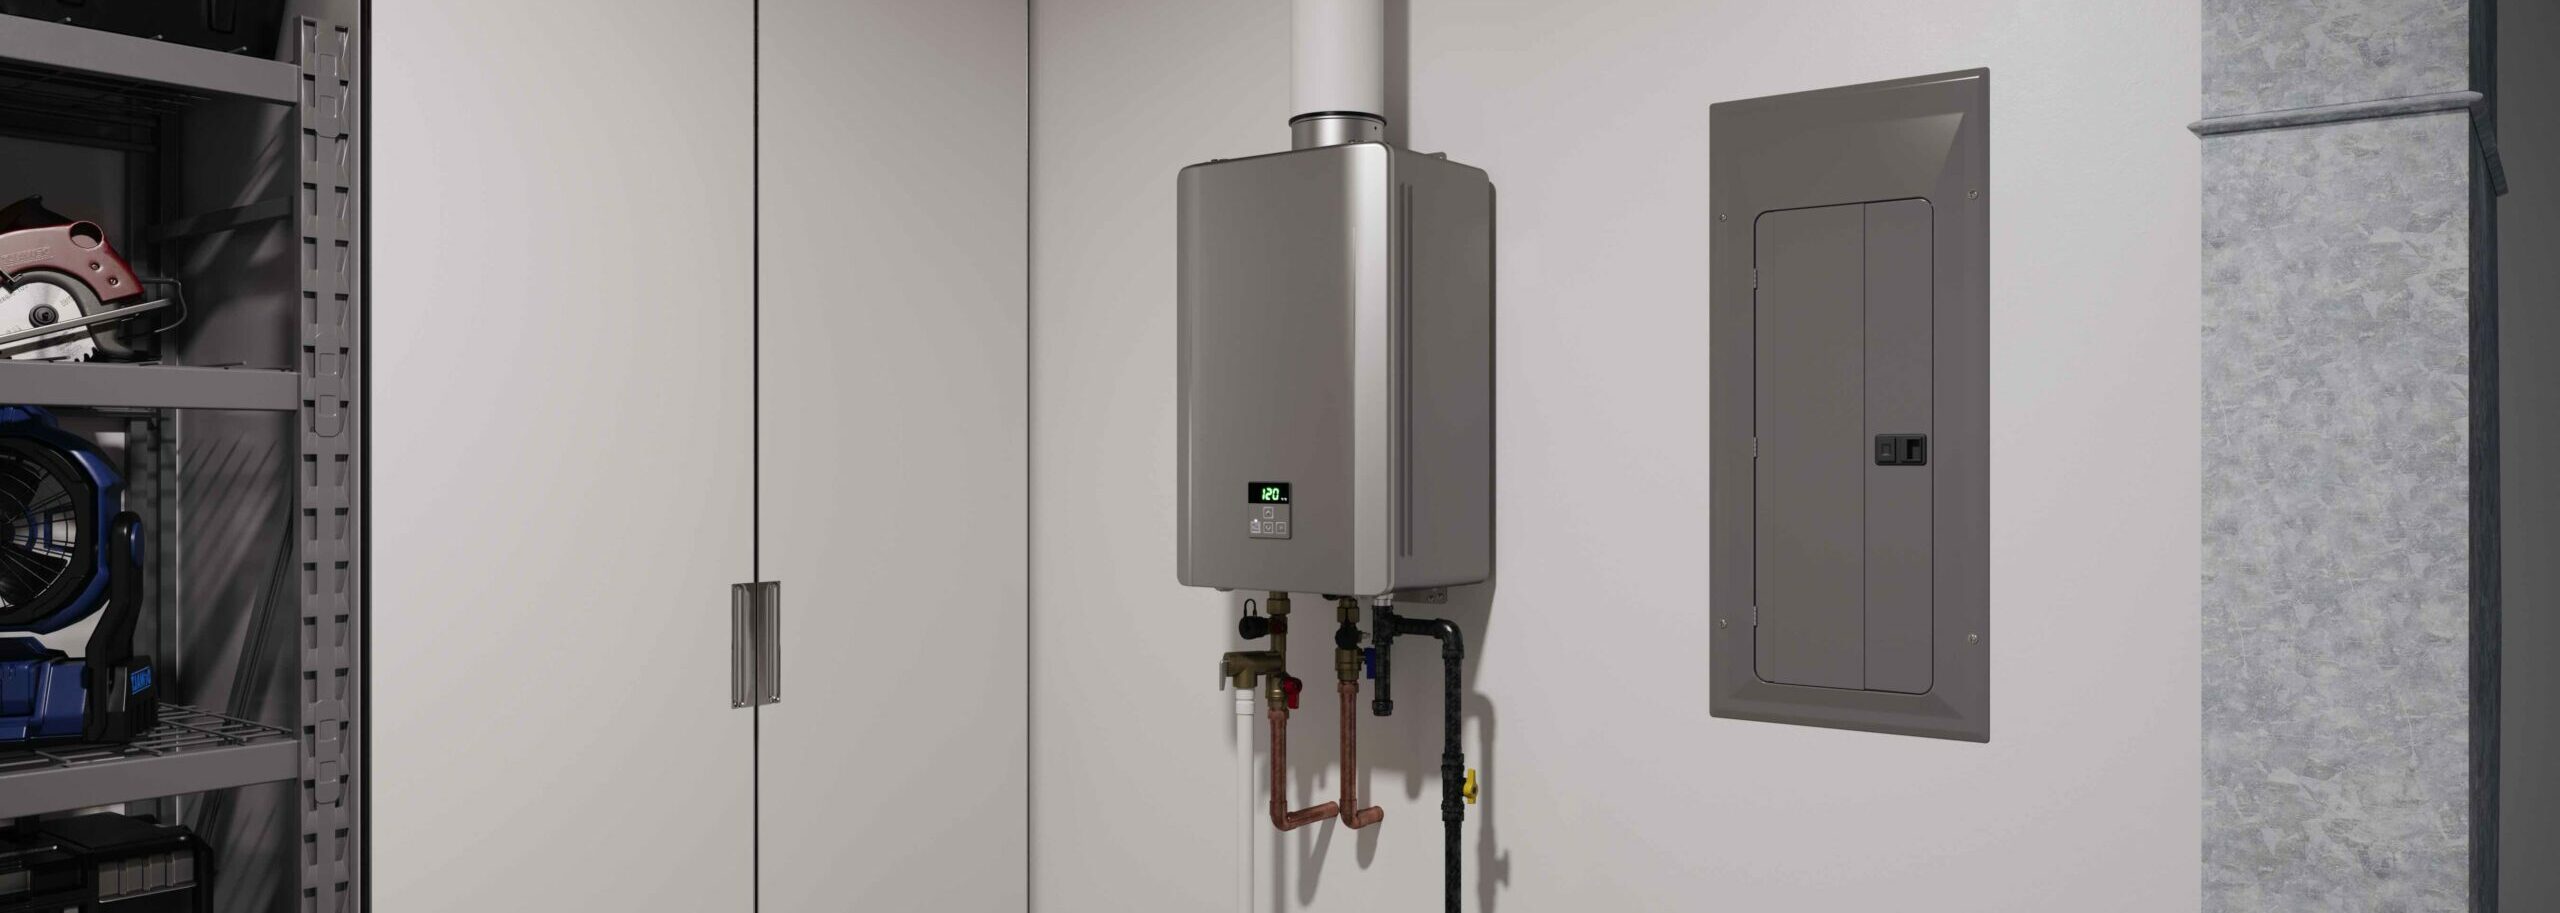 Pros and Cons to tankless water heater